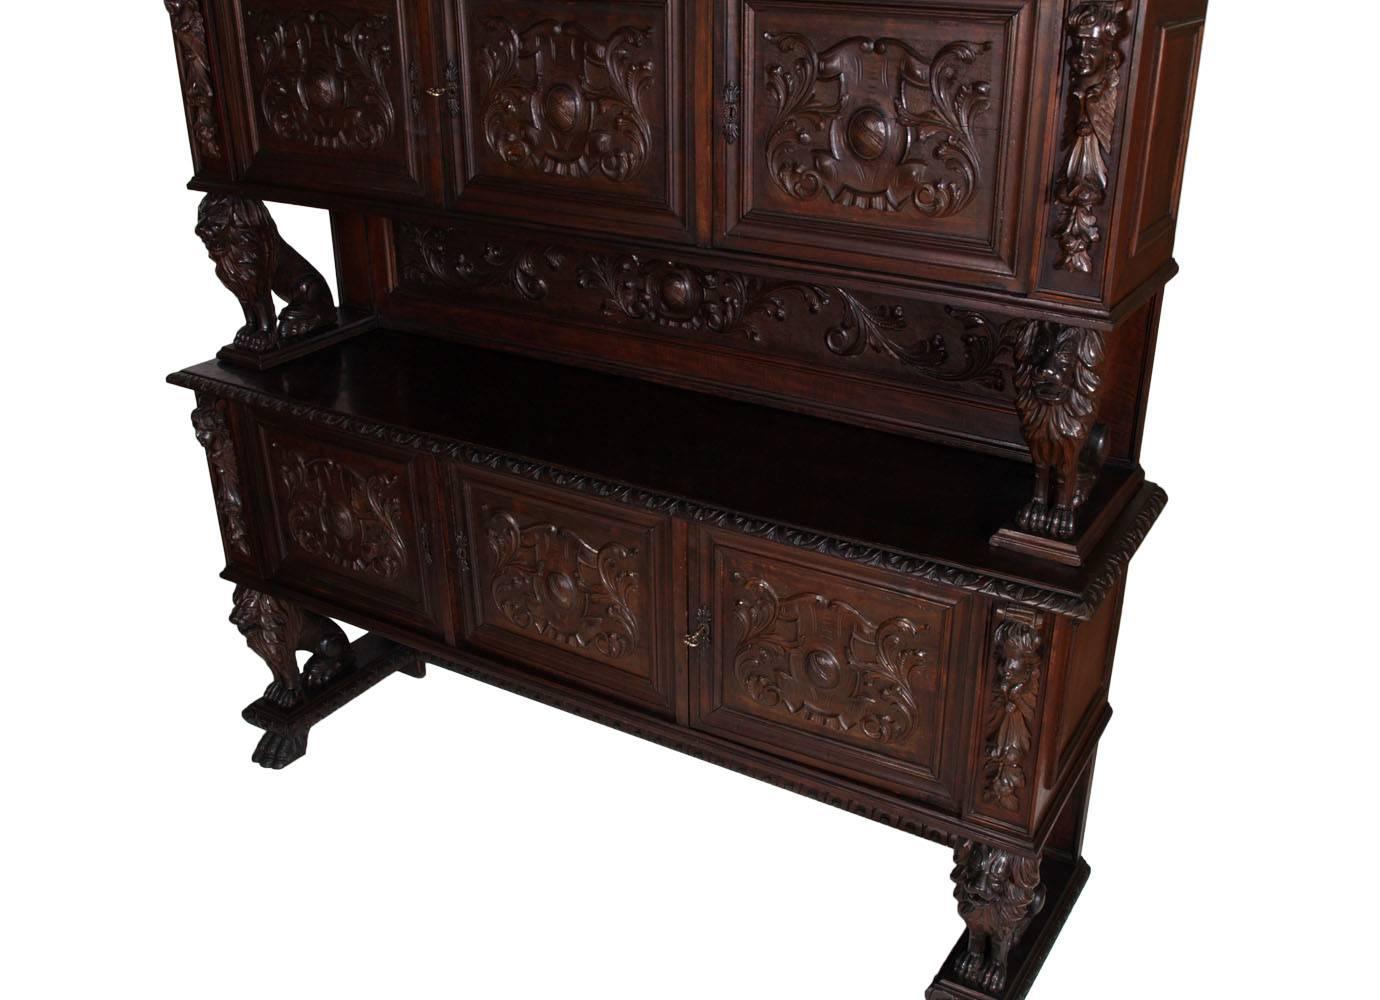 19th century sideboard